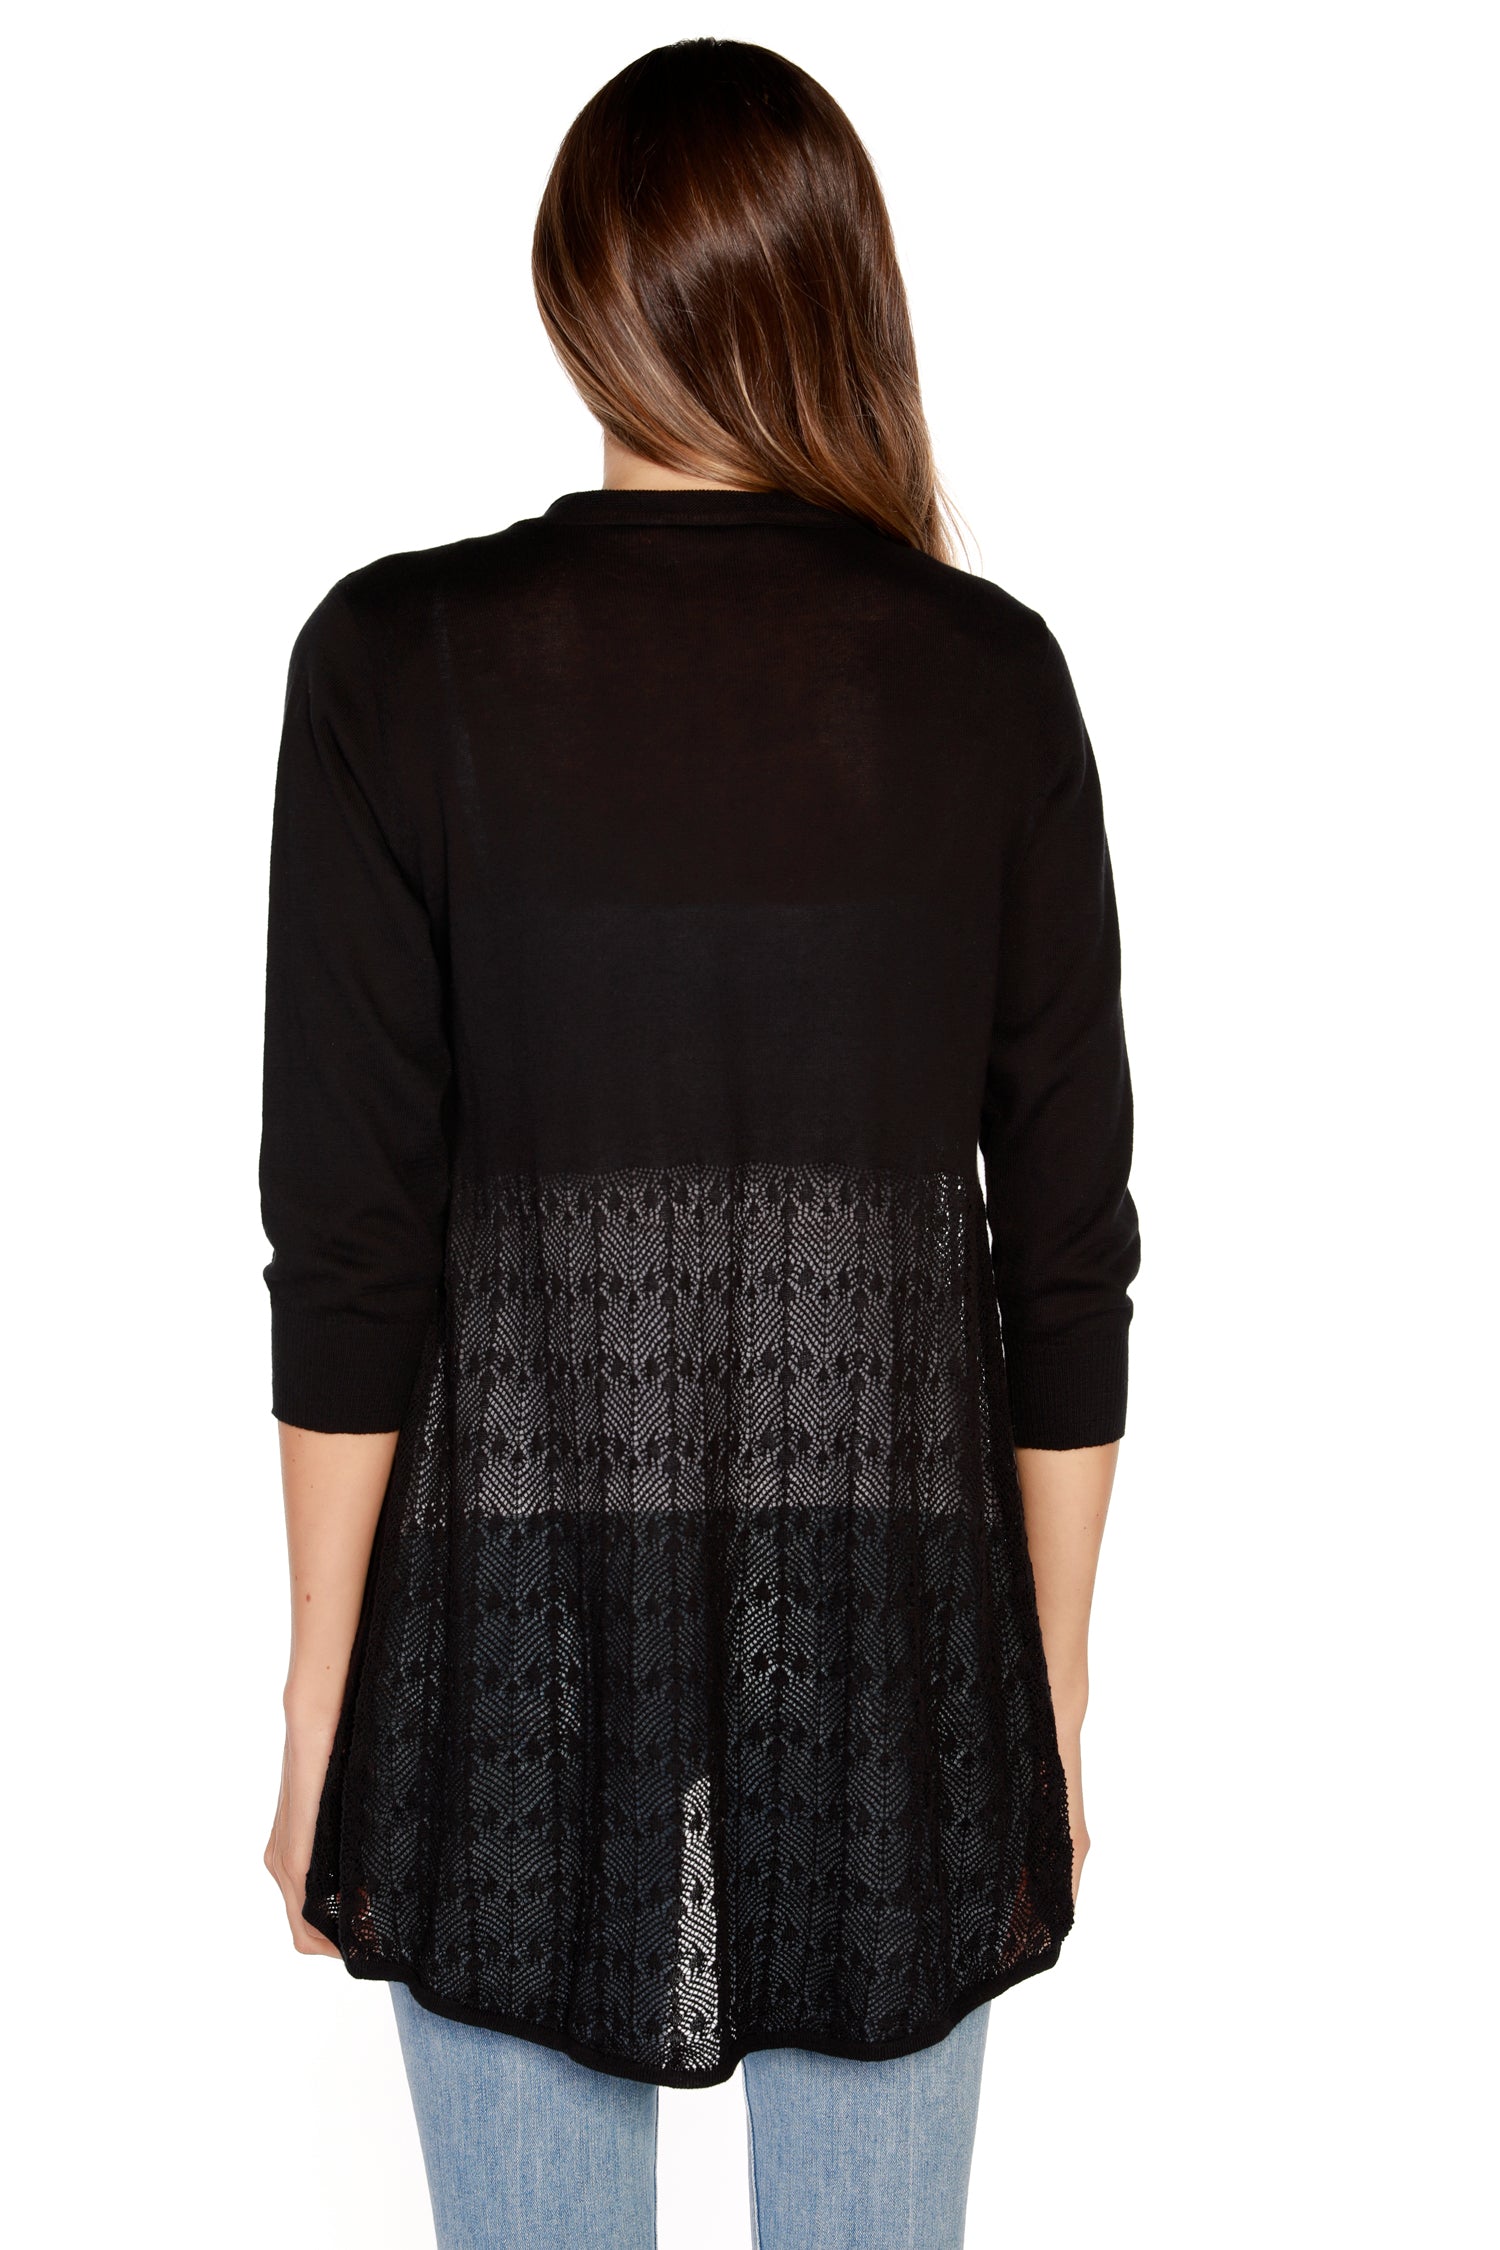 Women’s Open Front Semi-Sheer Lacey Pointelle High-Low Cardigan